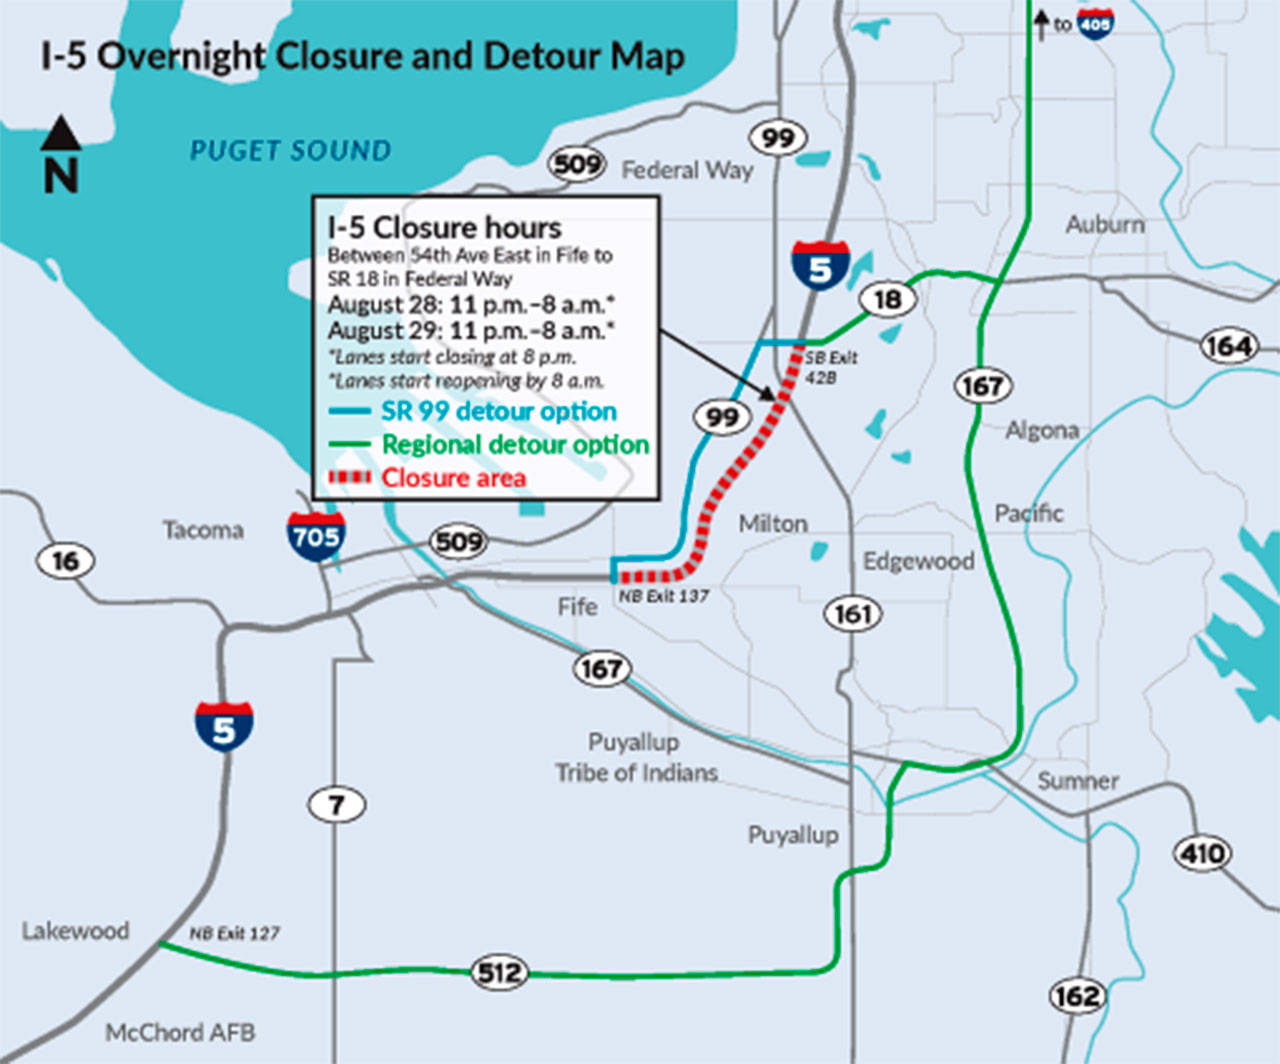 Closure and detour routes for I-5 overnight Aug. 28-30 between Fife and Federal Way. COURTESY GRAPHIC, state DOT